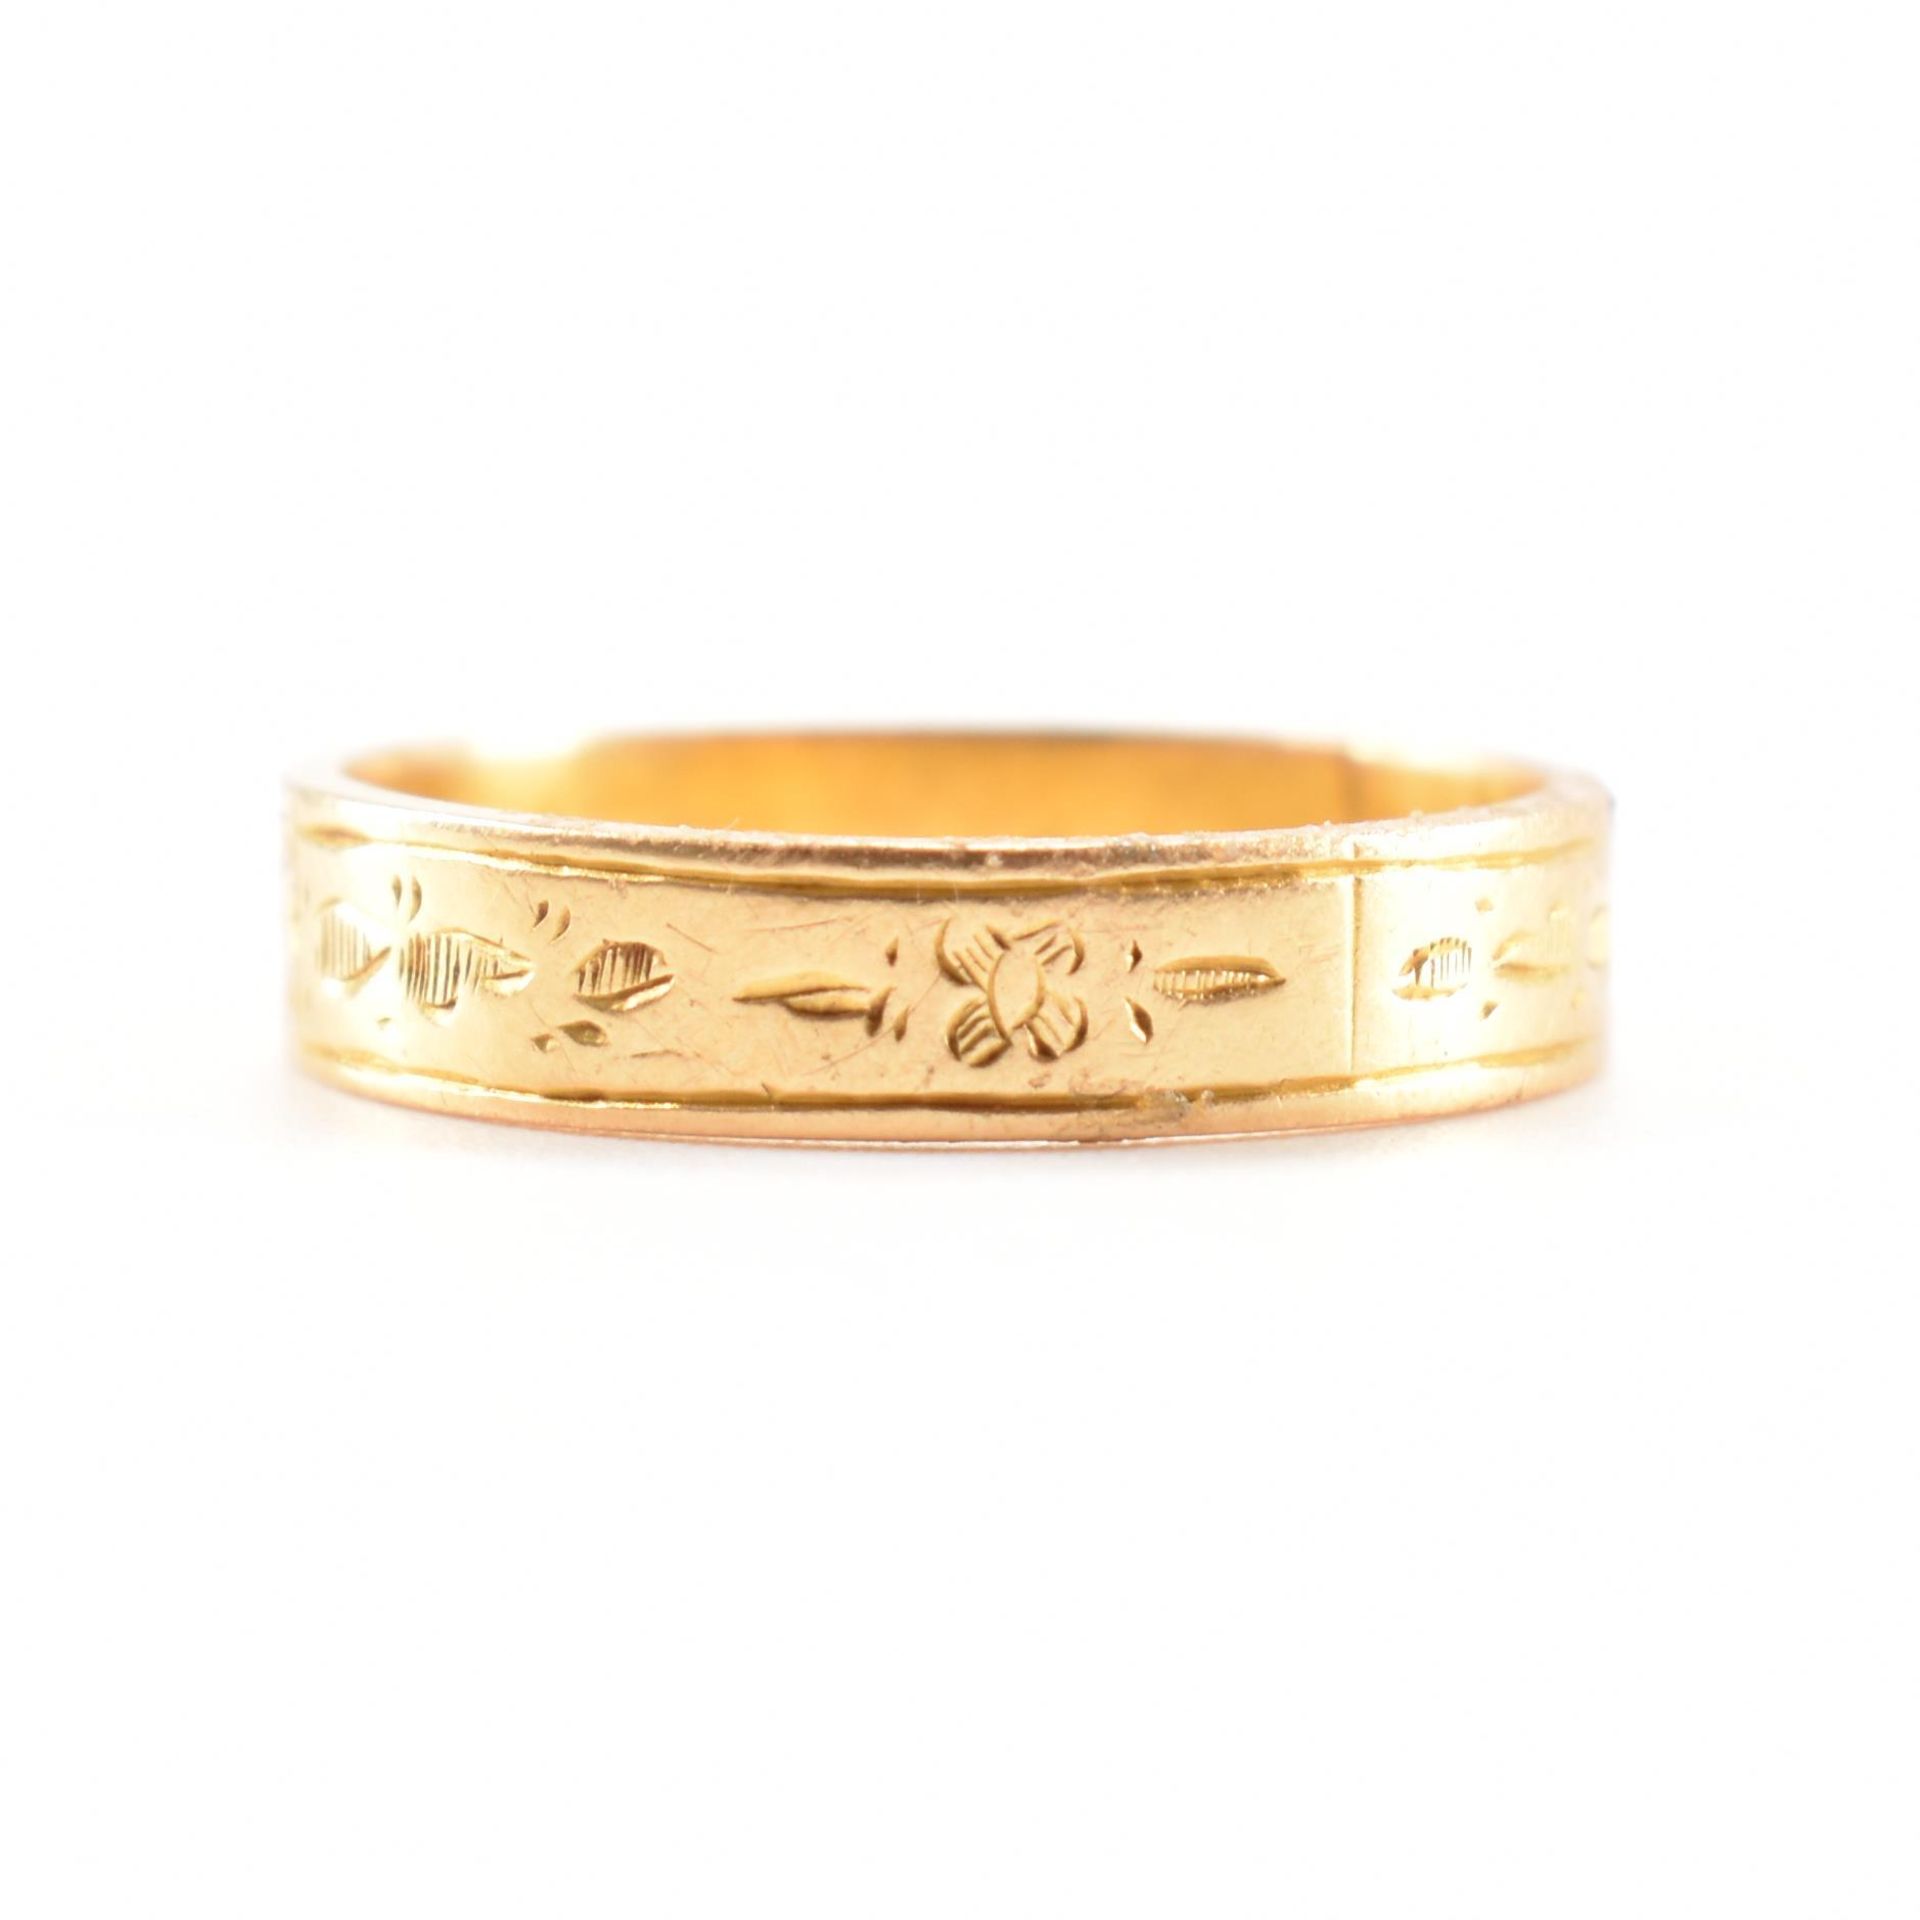 HALLMARKED 18CT GOLD TWIN HEART RING - Image 3 of 7